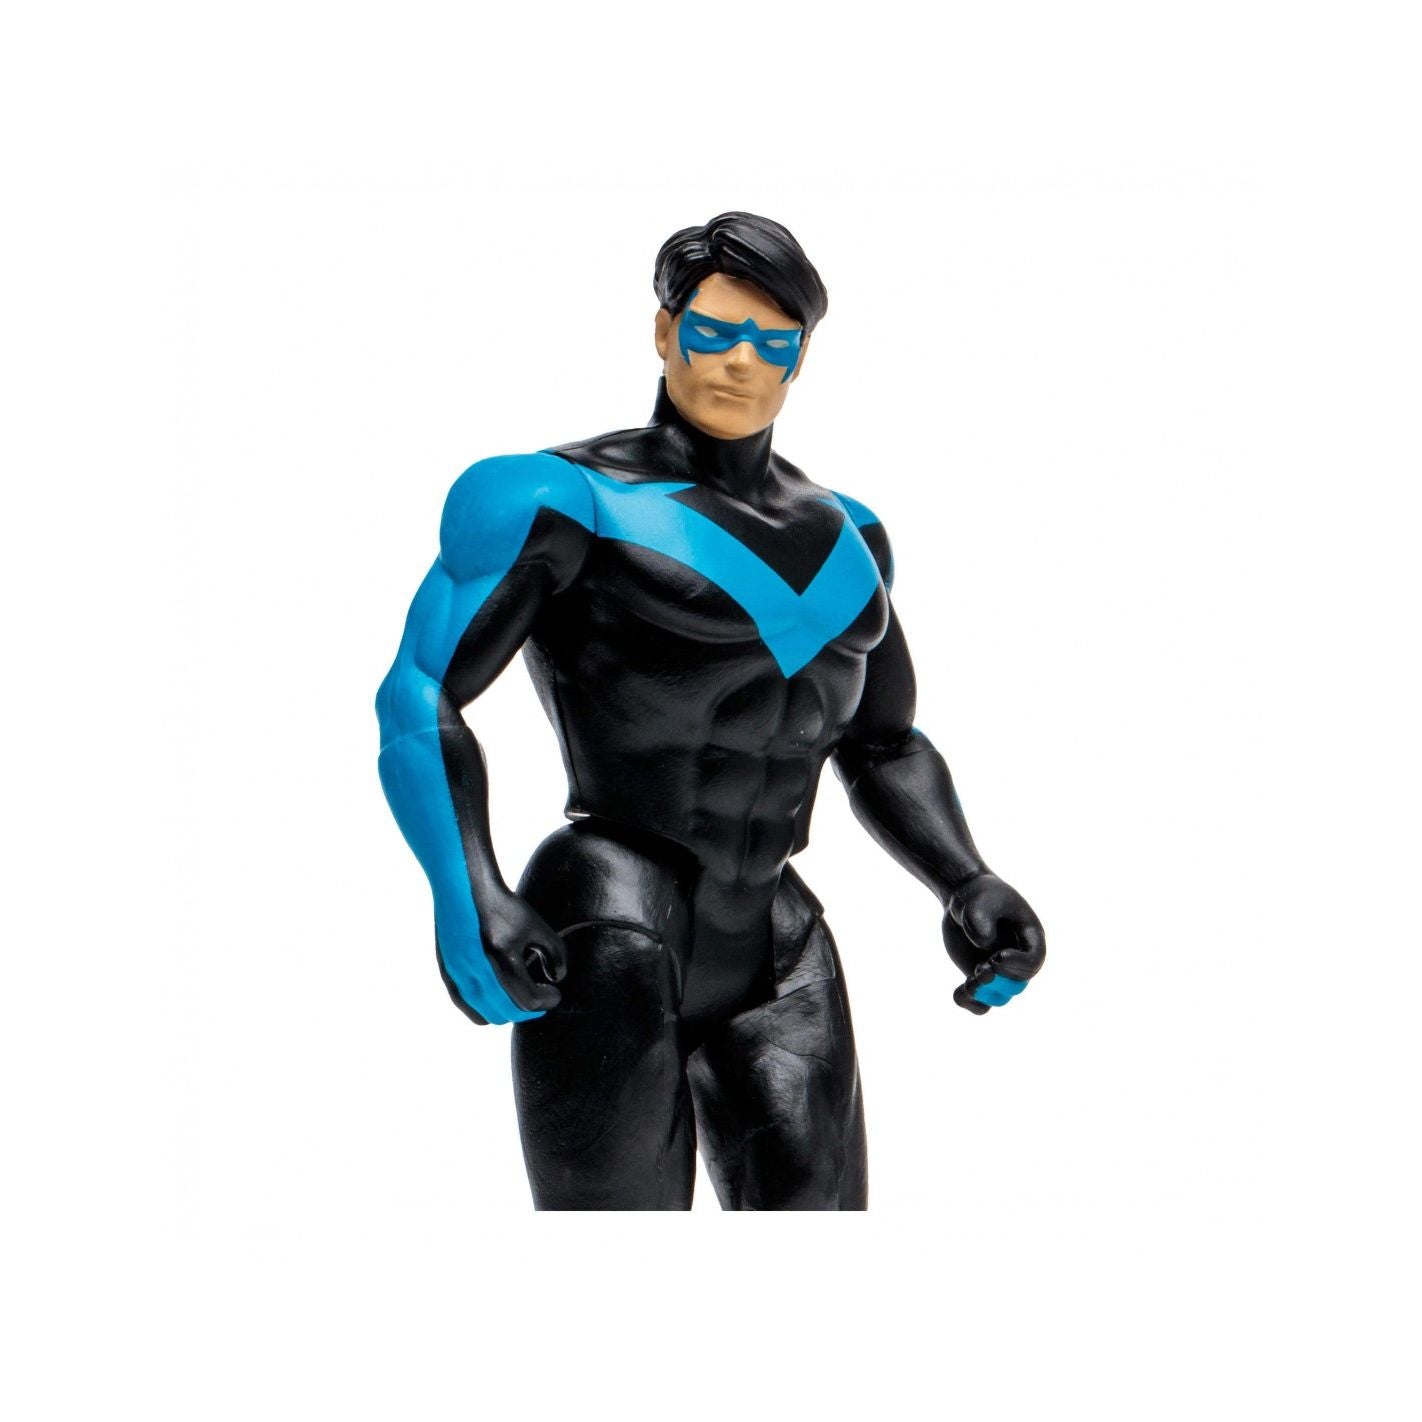 DC Direct Super Powers 5IN Figures WV3 - Nightwing (Hush) Action Figure Toy